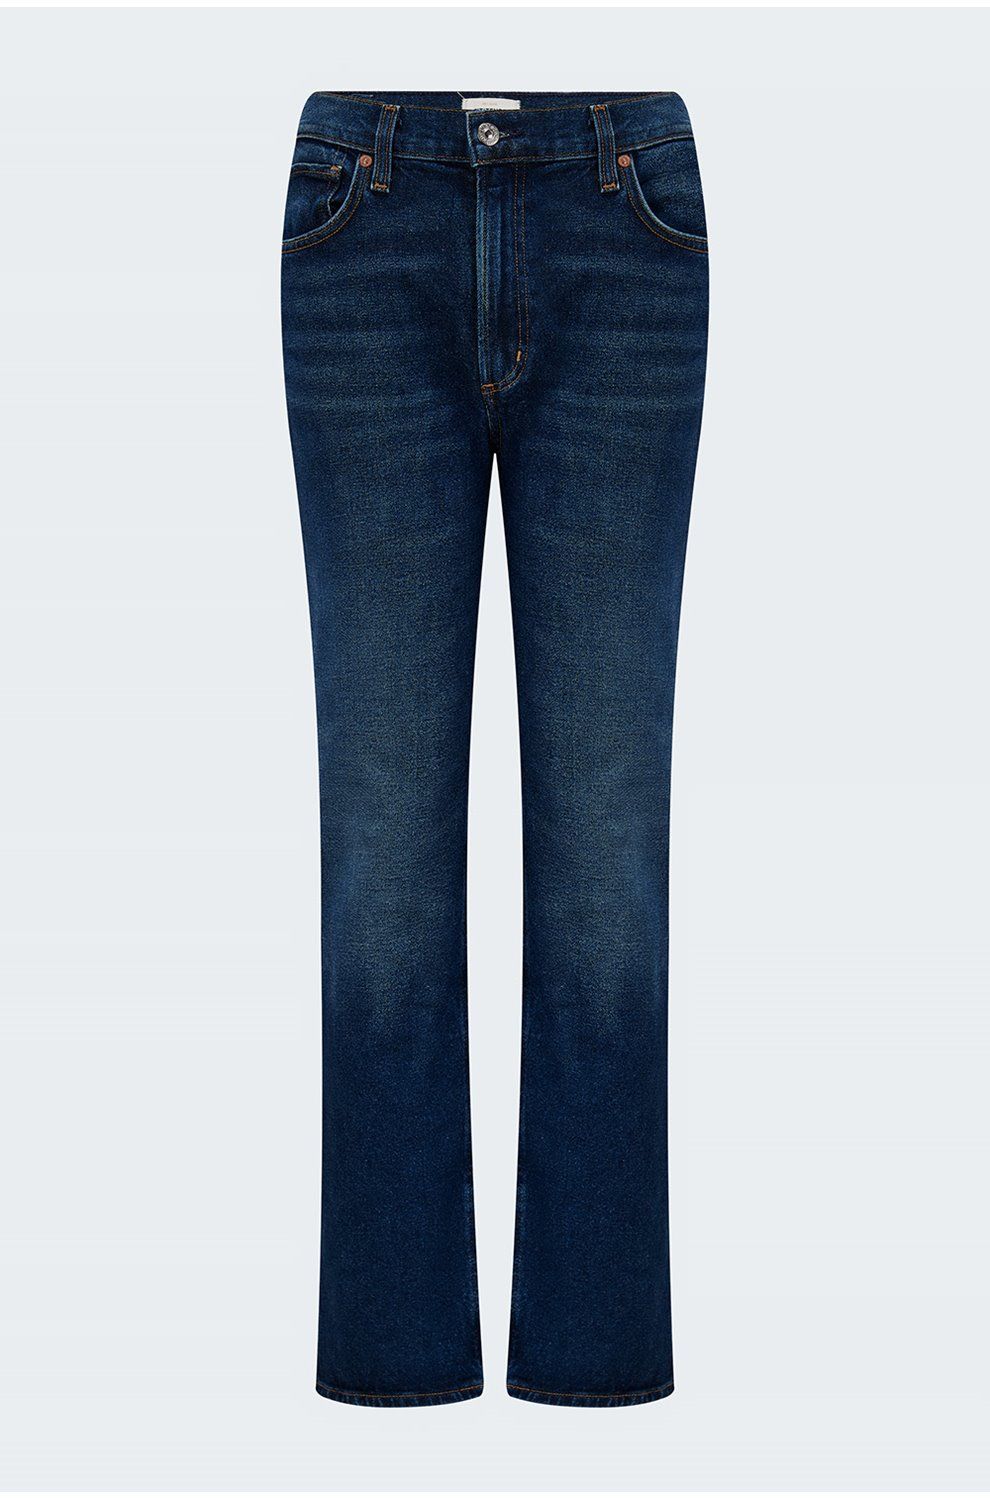 7 For All Mankind Flared Corduroy Trousers - Farfetch